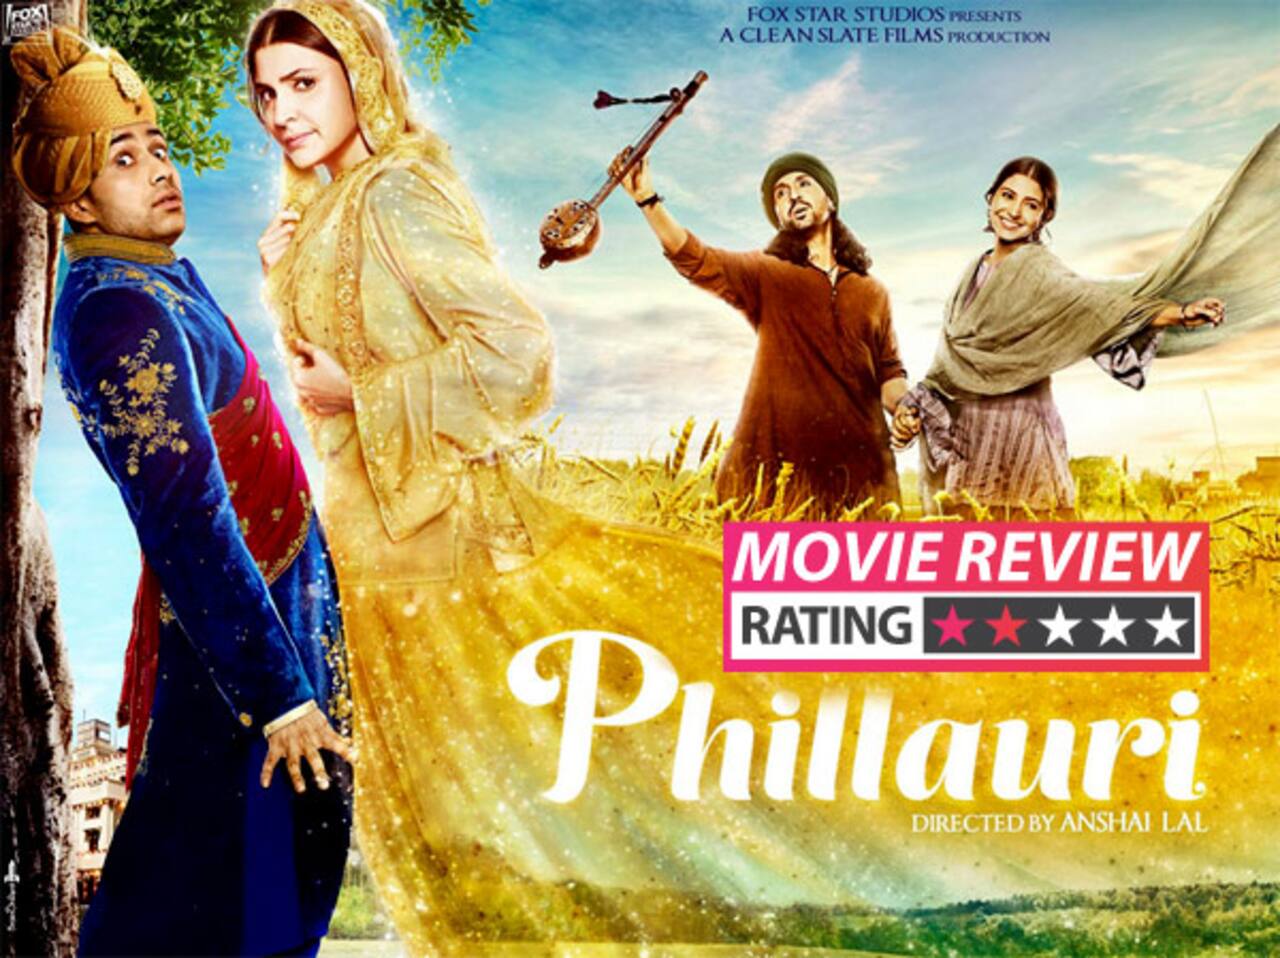 Phillauri movie review:  Anushka Sharma's ghost act ends up being a tiresome experience